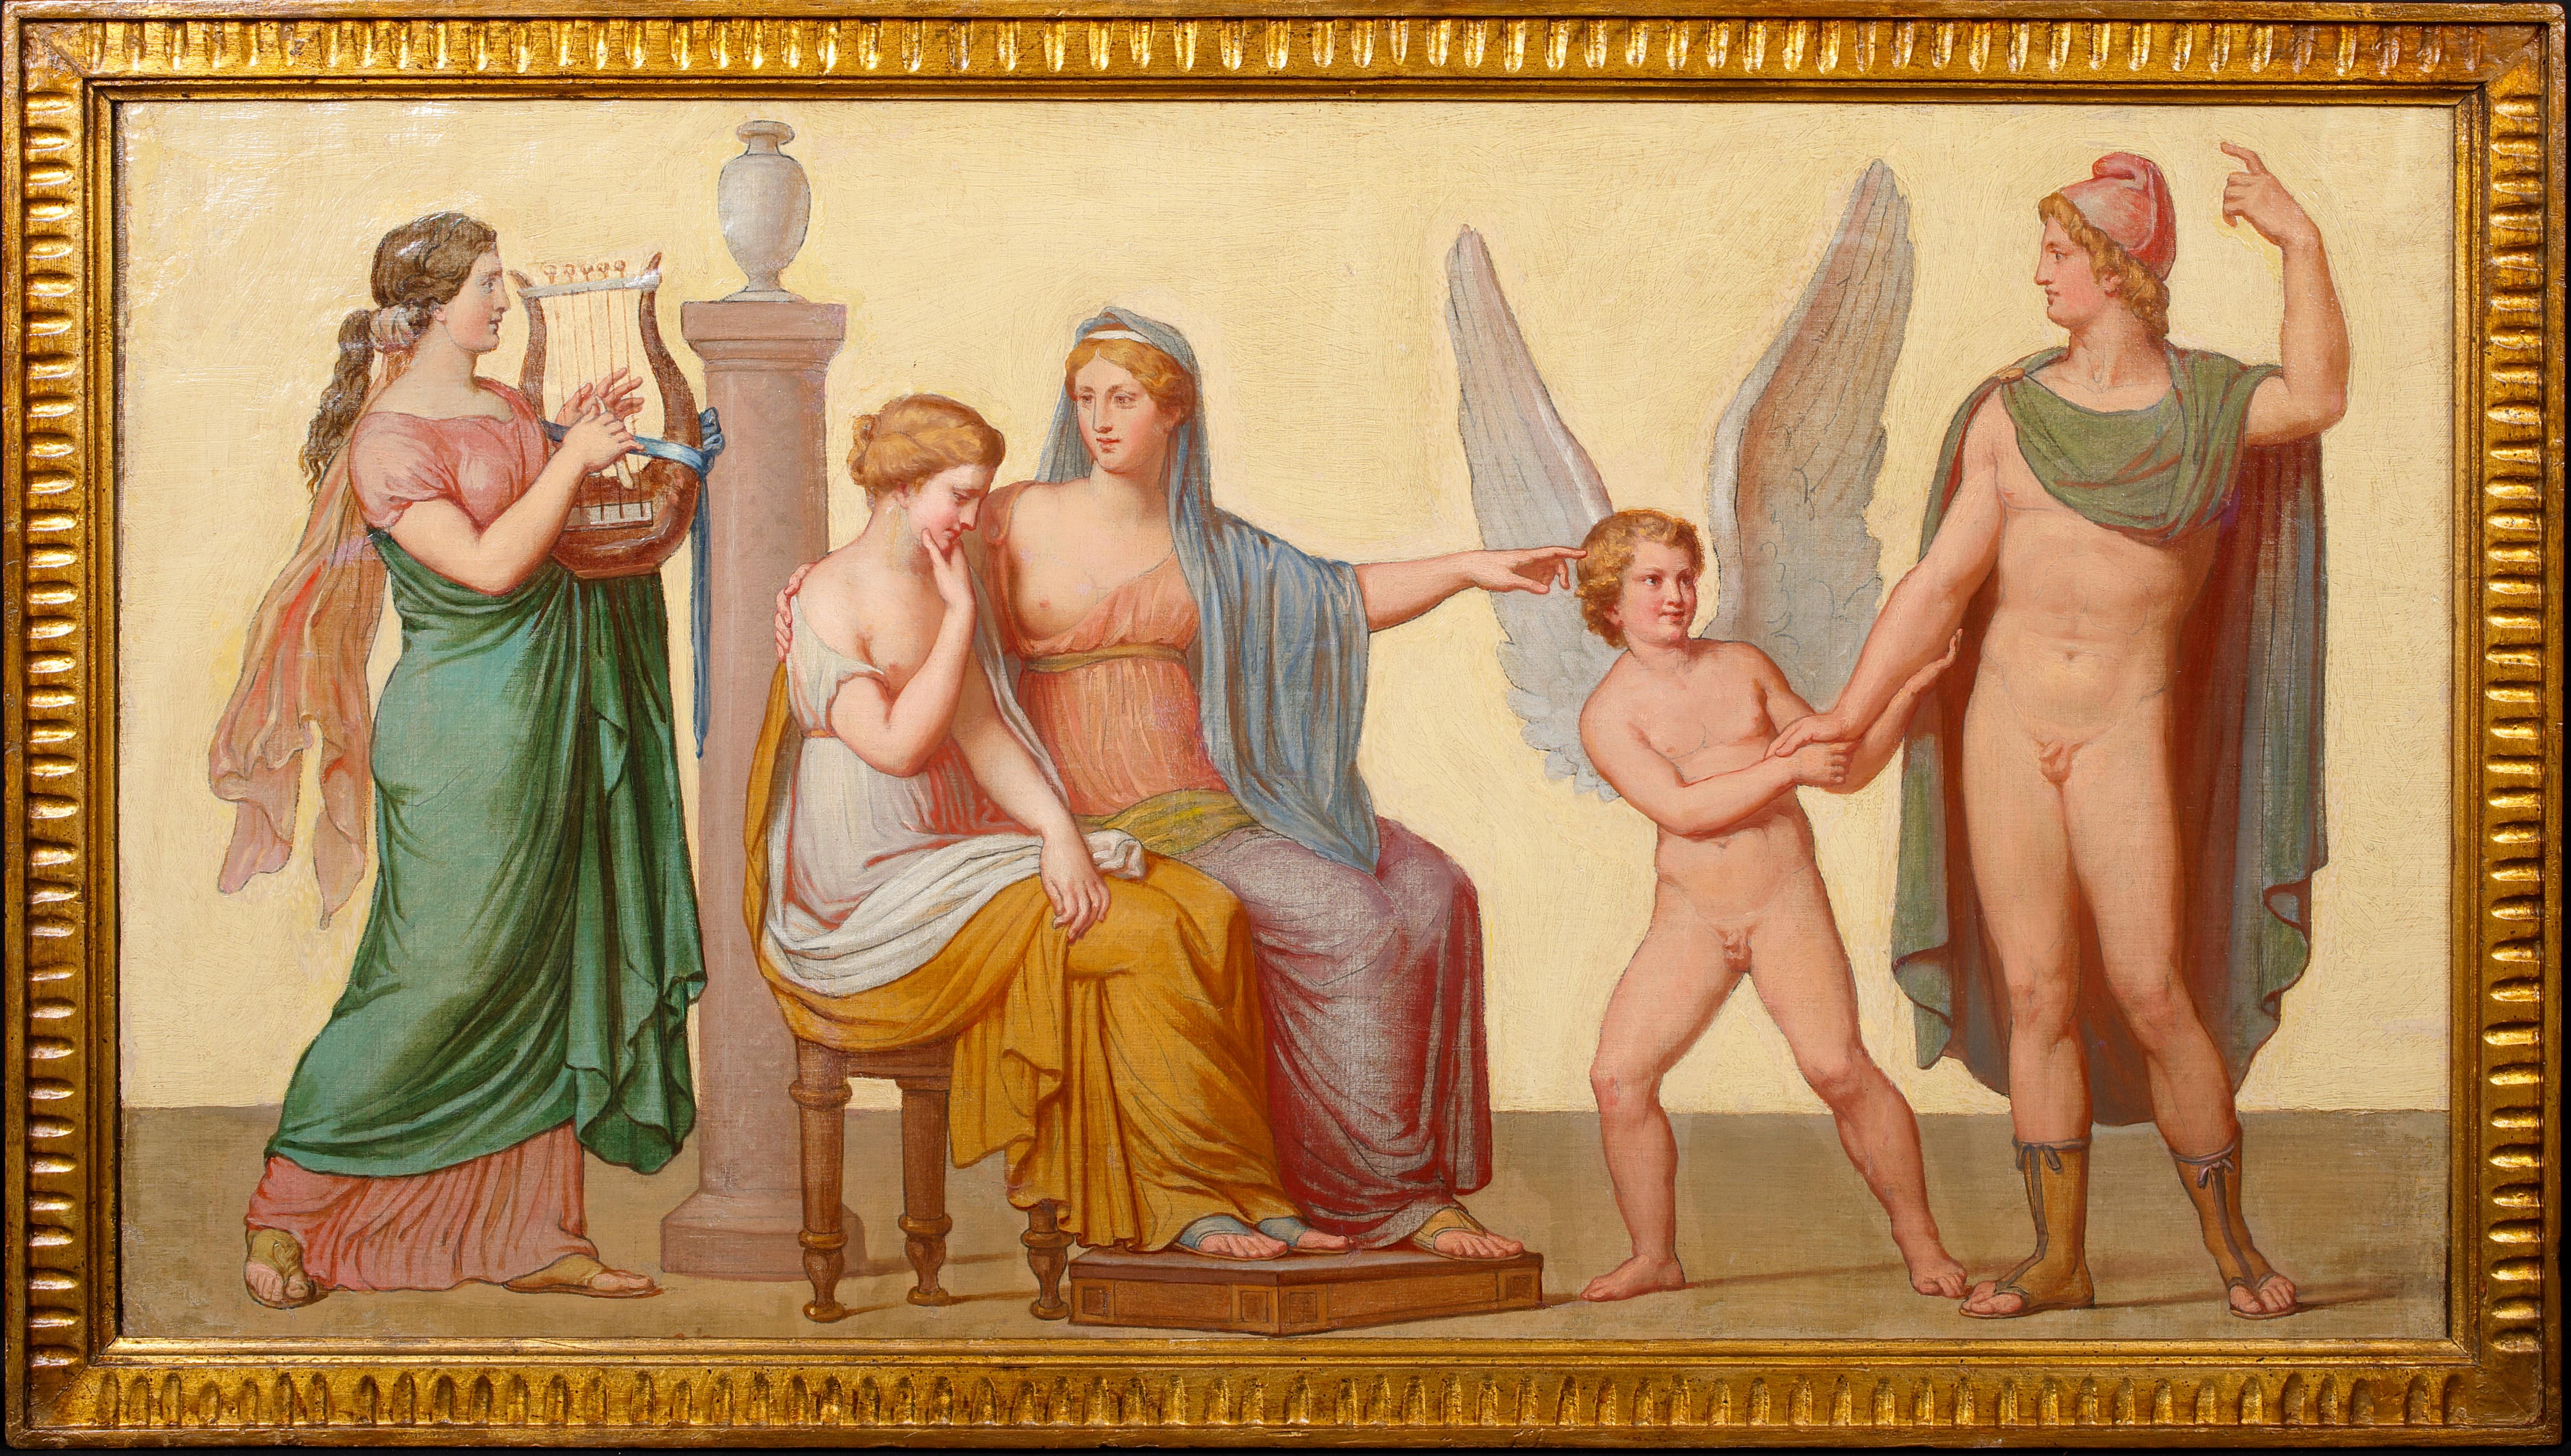 Unknown Portrait Painting - The Roman Gods In An Allegory Of Love, 18th Century  Italian School 